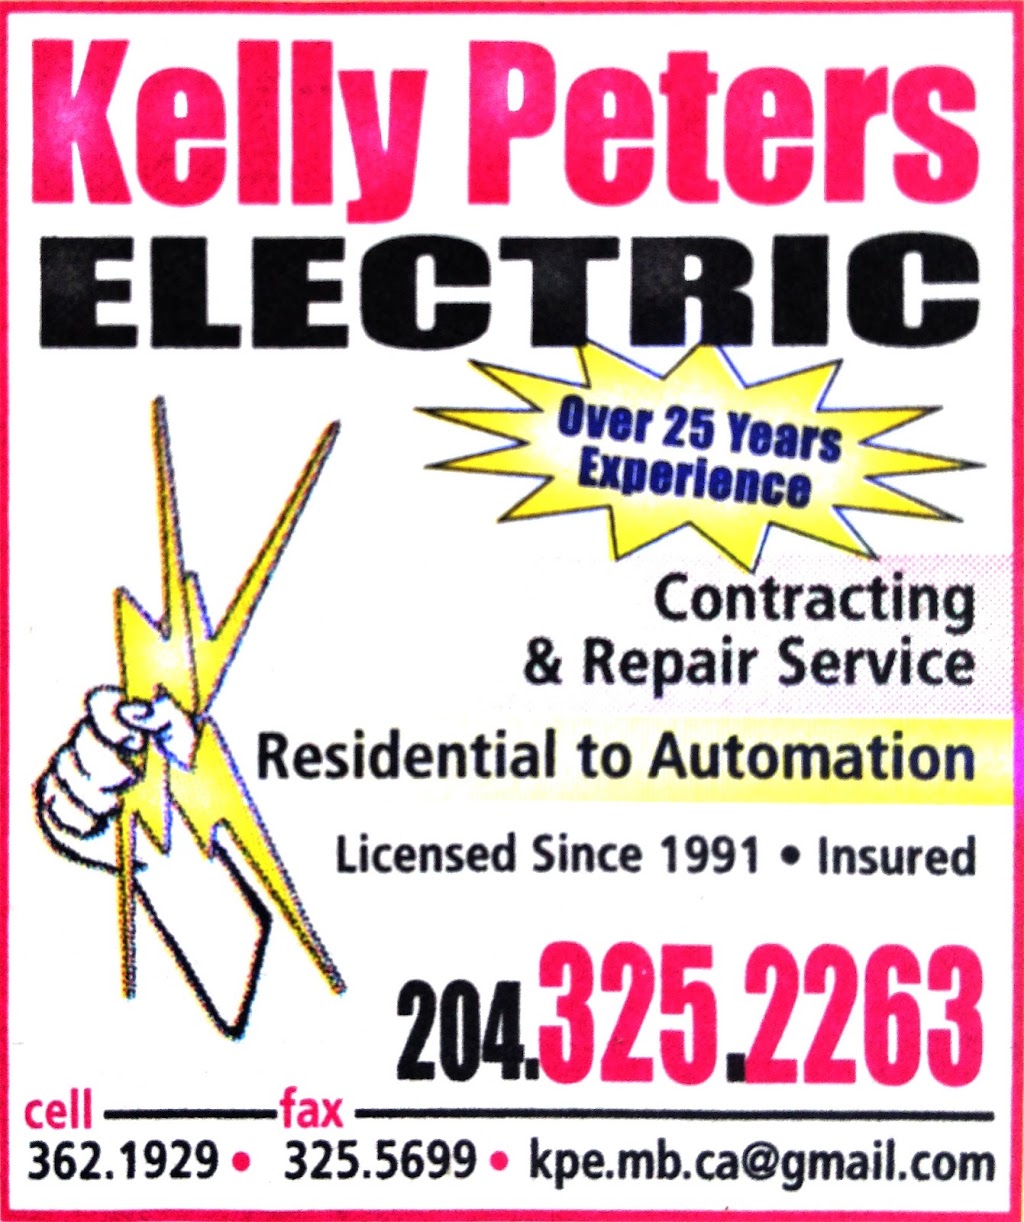 Kelly Peters Electric | R.R.#1, BOX 381, Winkler, MB R6W 4A1, Canada | Phone: (204) 362-1929